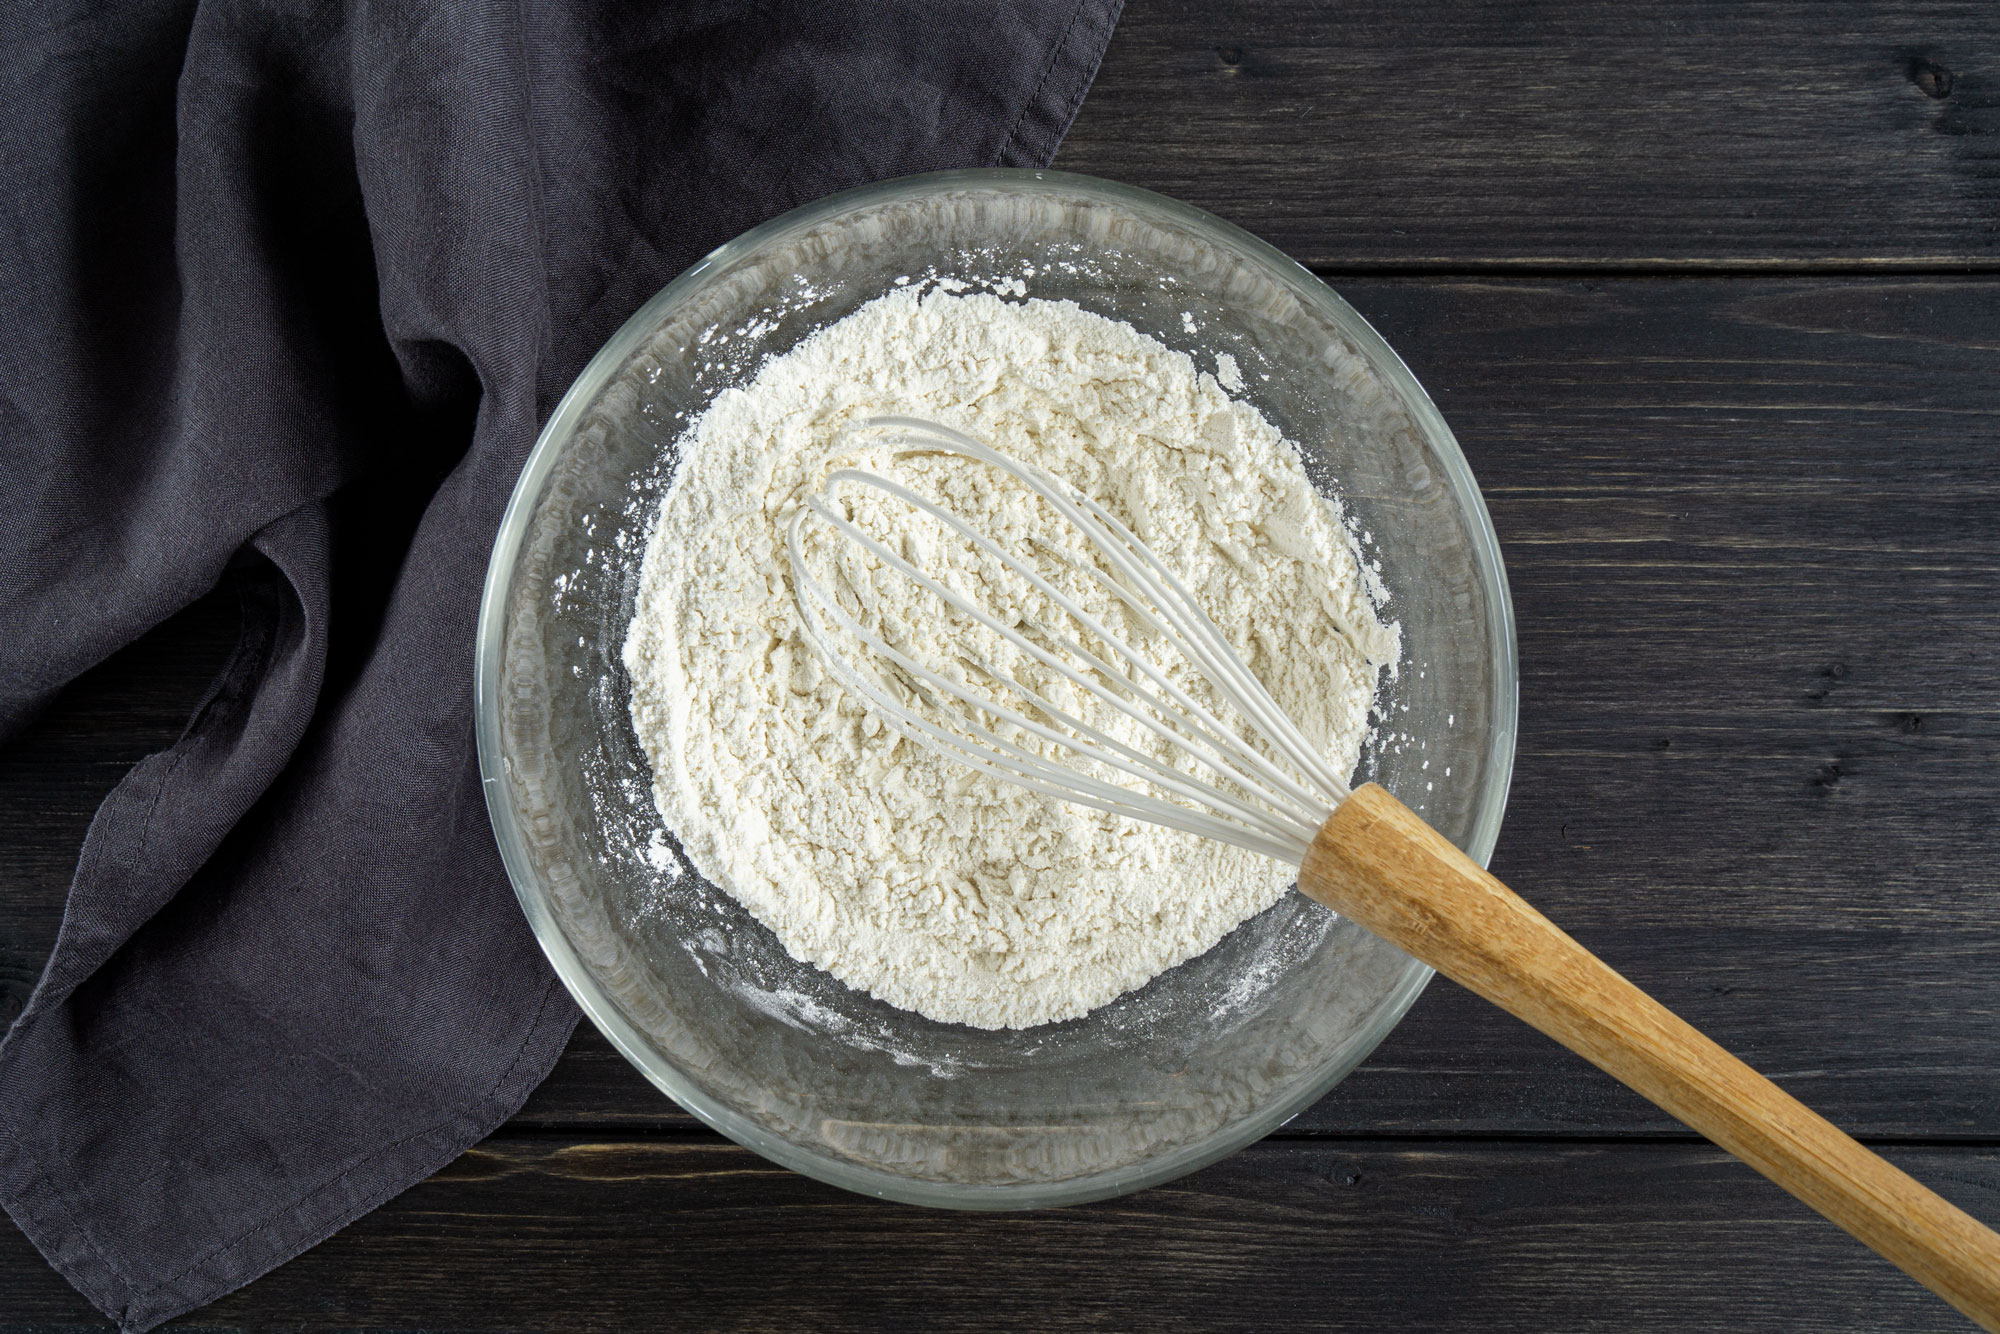 Flour mixed with baking powder in a bowl